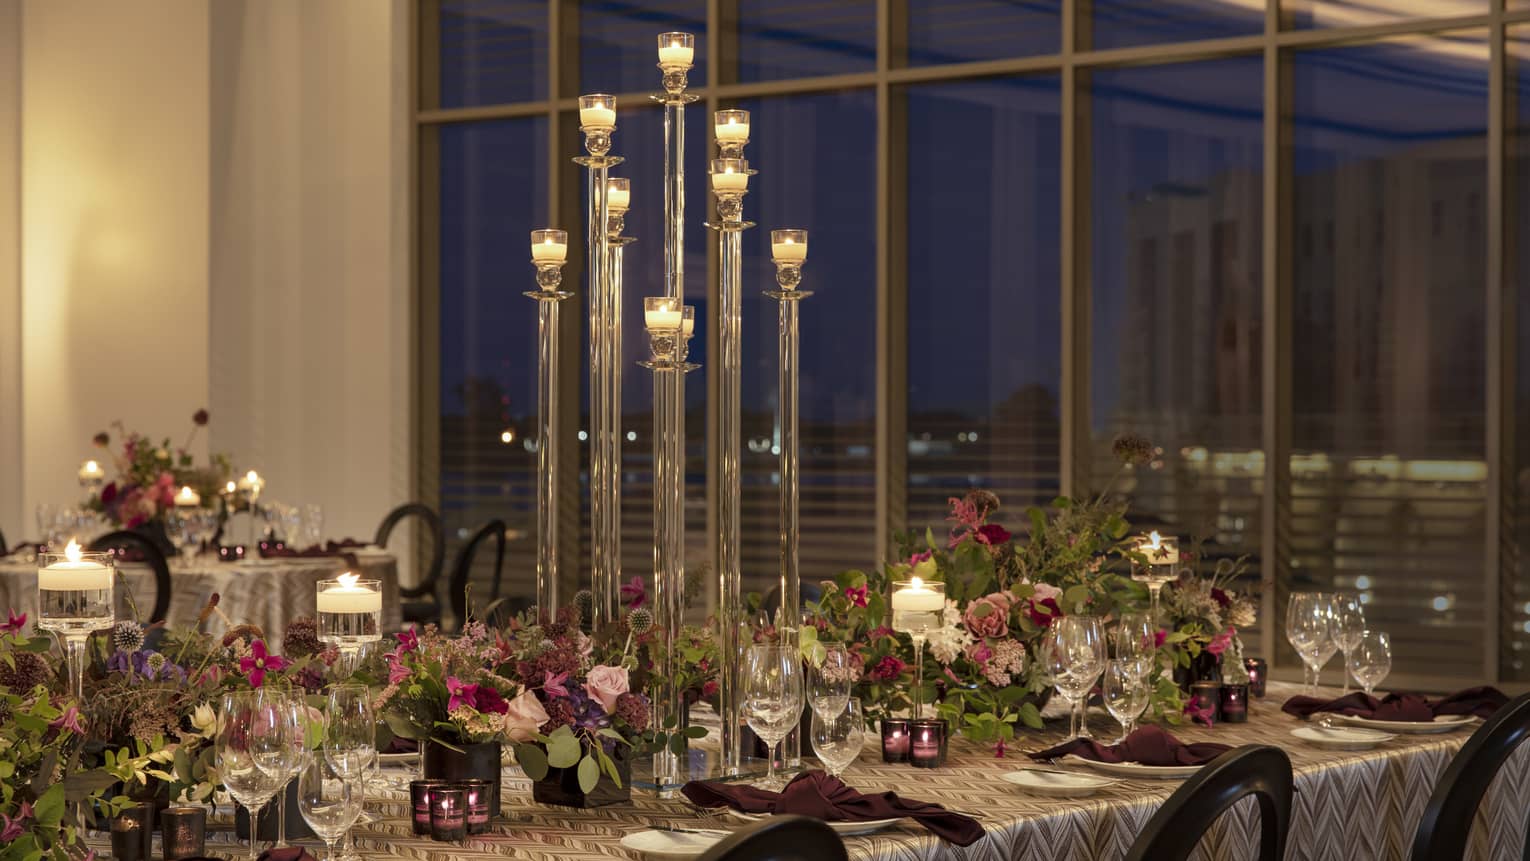 Long table in ballroom decorated with fuchsia centrepieces and greenery, tall candelabras, floor-to-ceiling window overlooking downtown New Orleans